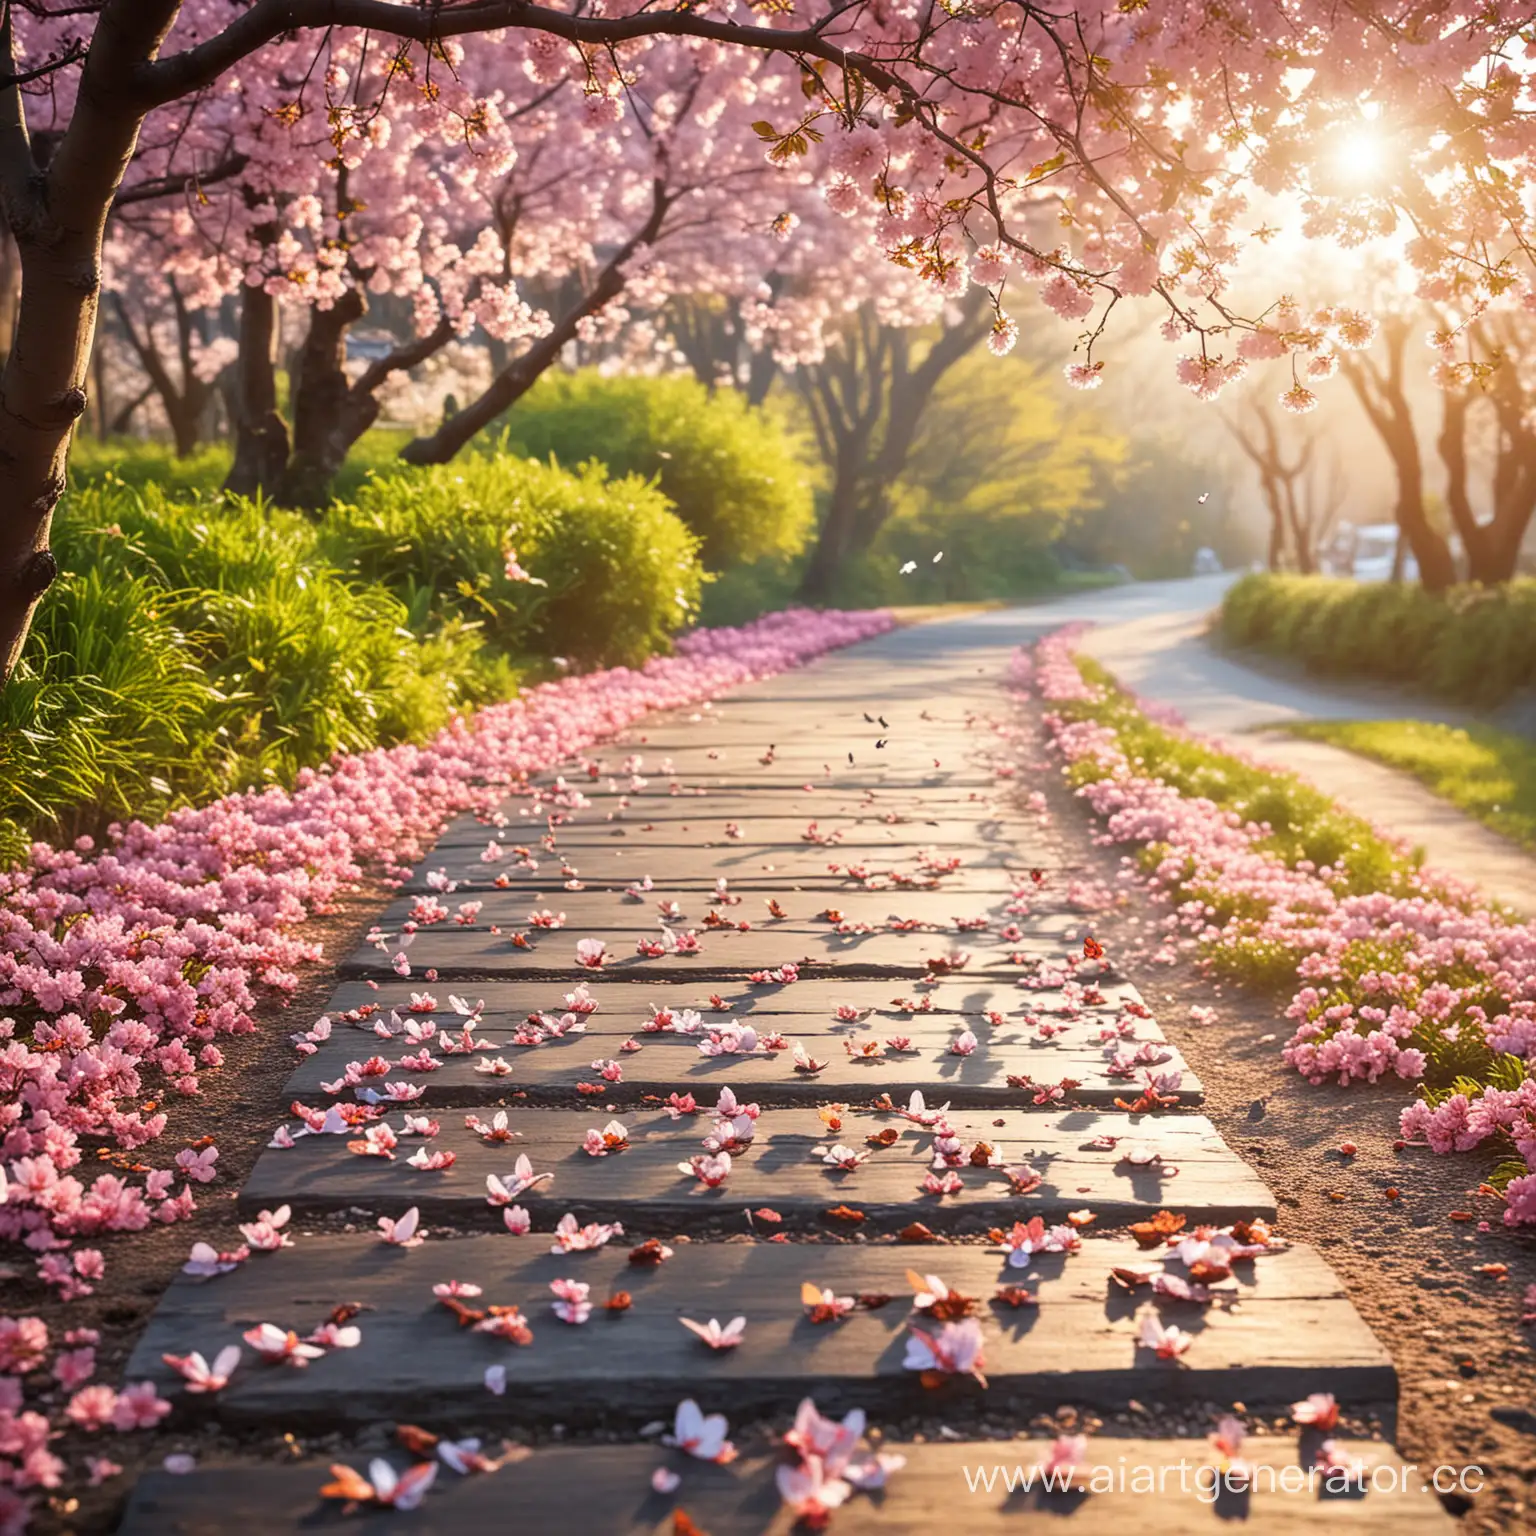 Sakura-Blossoms-and-Butterflies-in-the-Morning-Sunlight